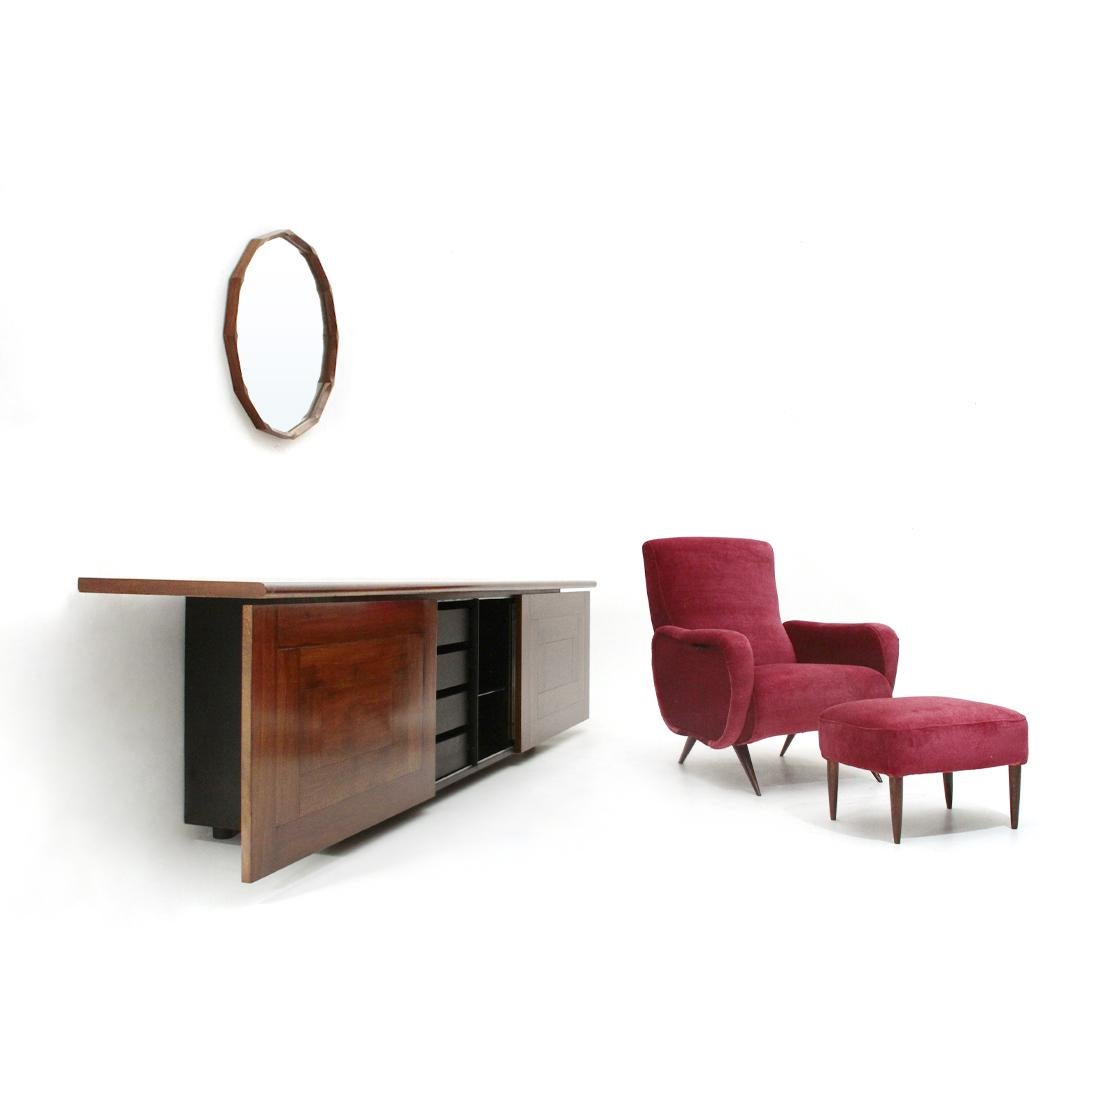 Two-Door “Sheraton” Sideboard by Giotto Stoppino and Lodovico Acerbis for Acerbi 7